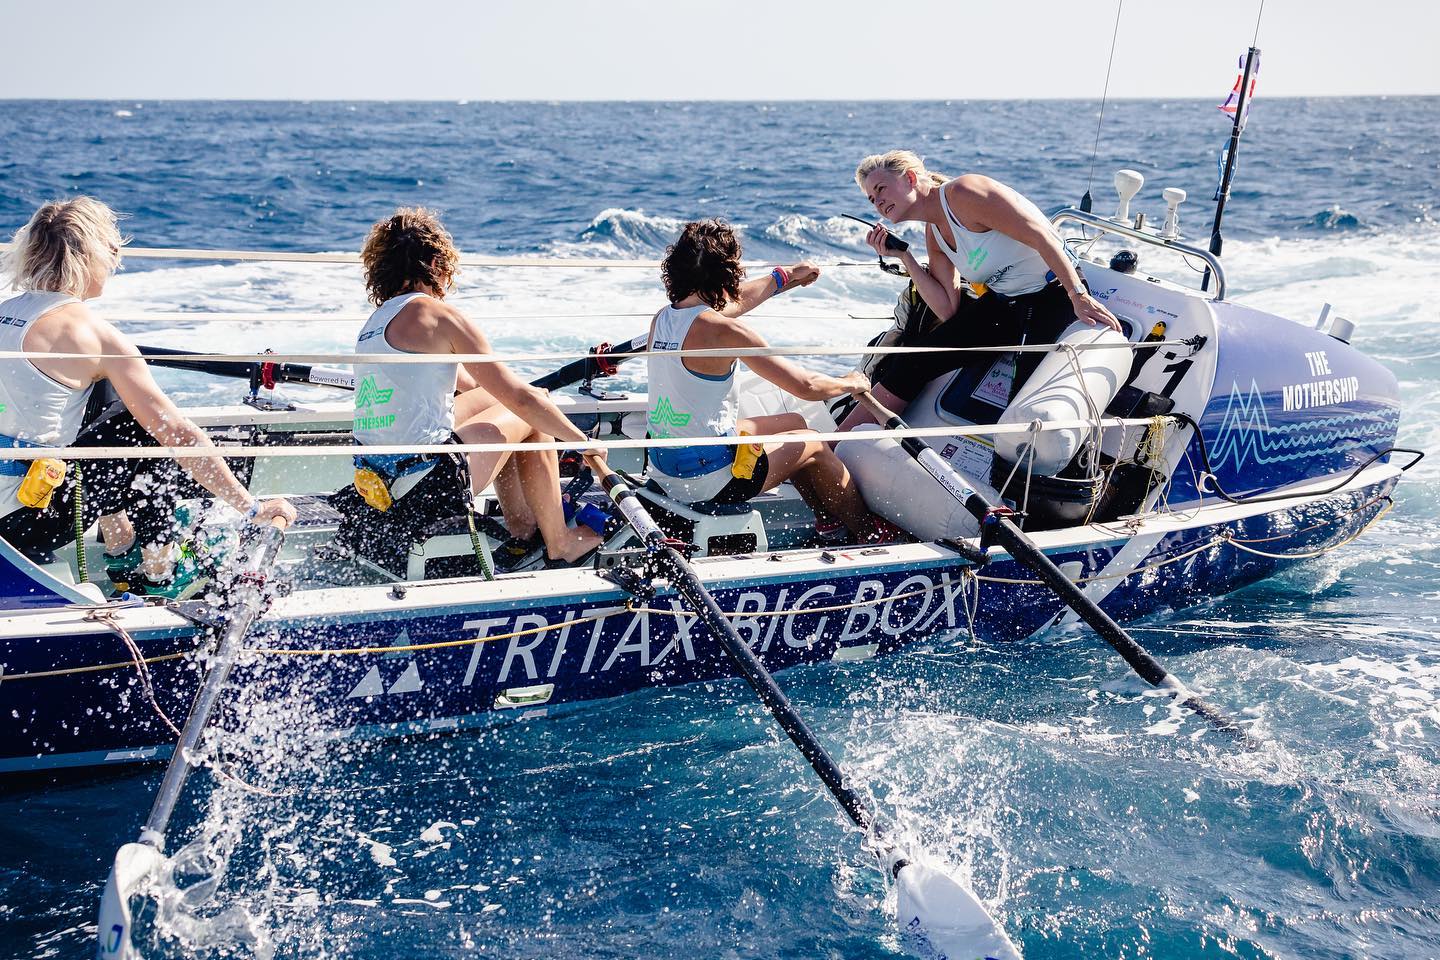 The Mothership rowing the Atlantic